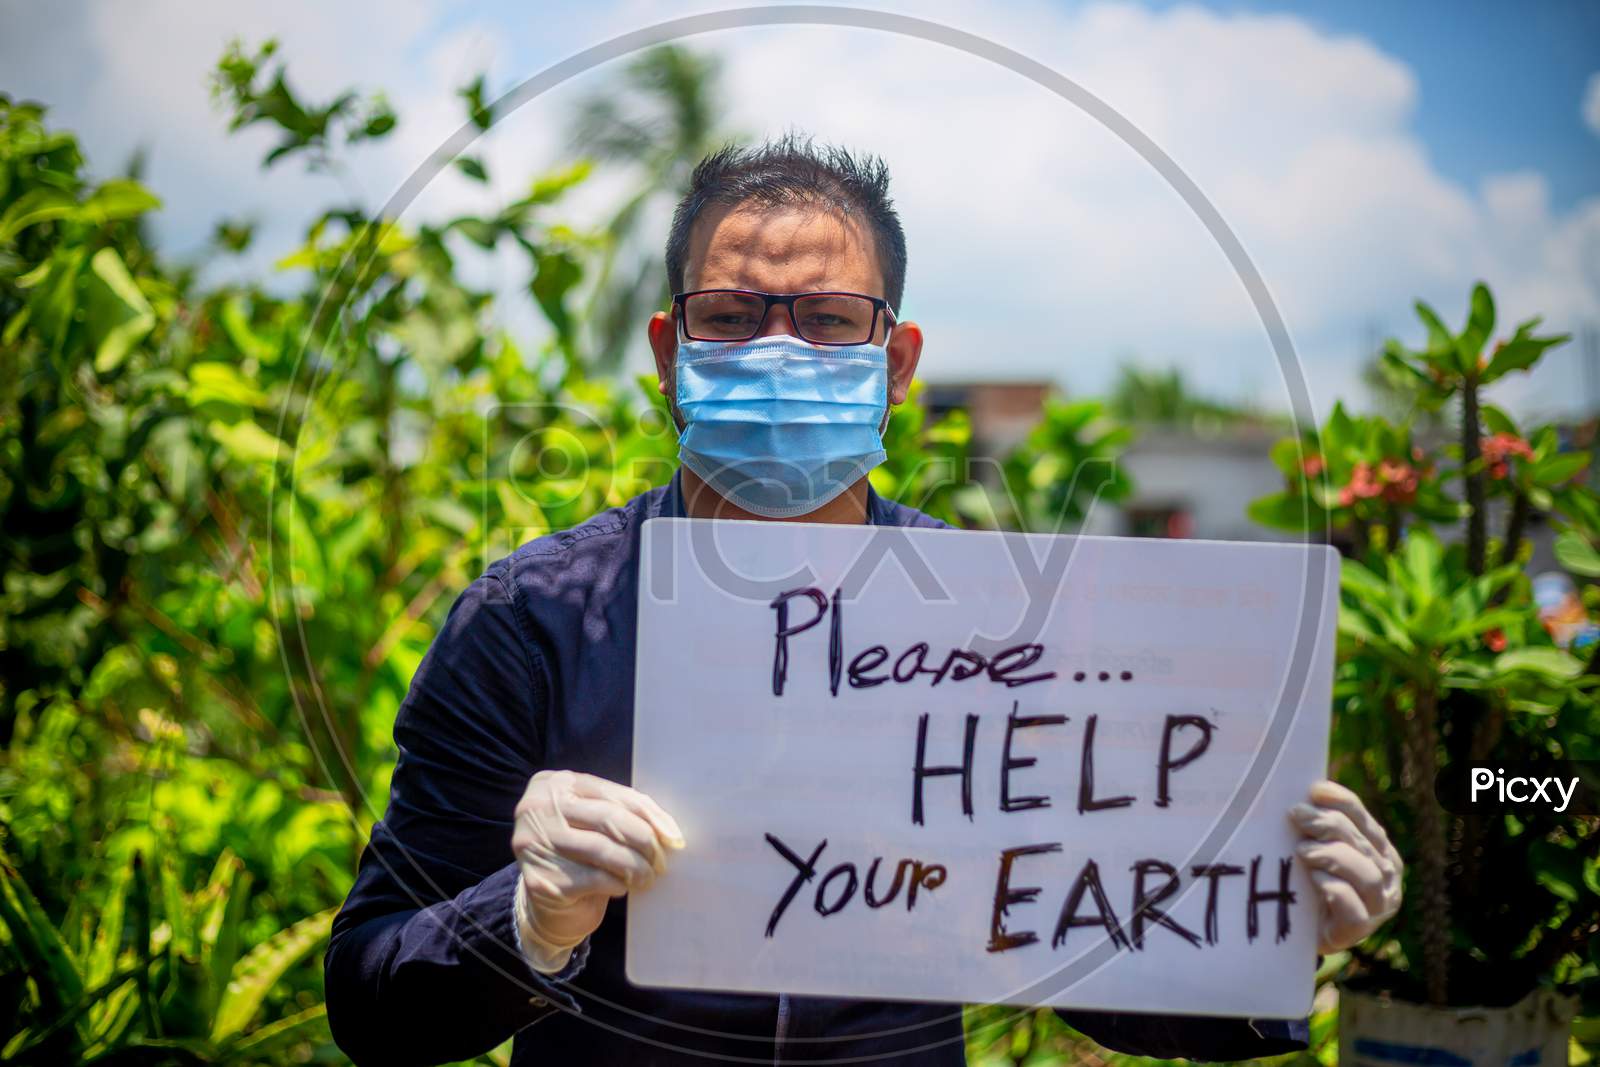 A Young Man Wearing A Medical Mask And Safety Gloves Sitting With A Placard Message To "Please Help Your Earth". A Man Holding A Placard Message In Outdoor Natural Light.